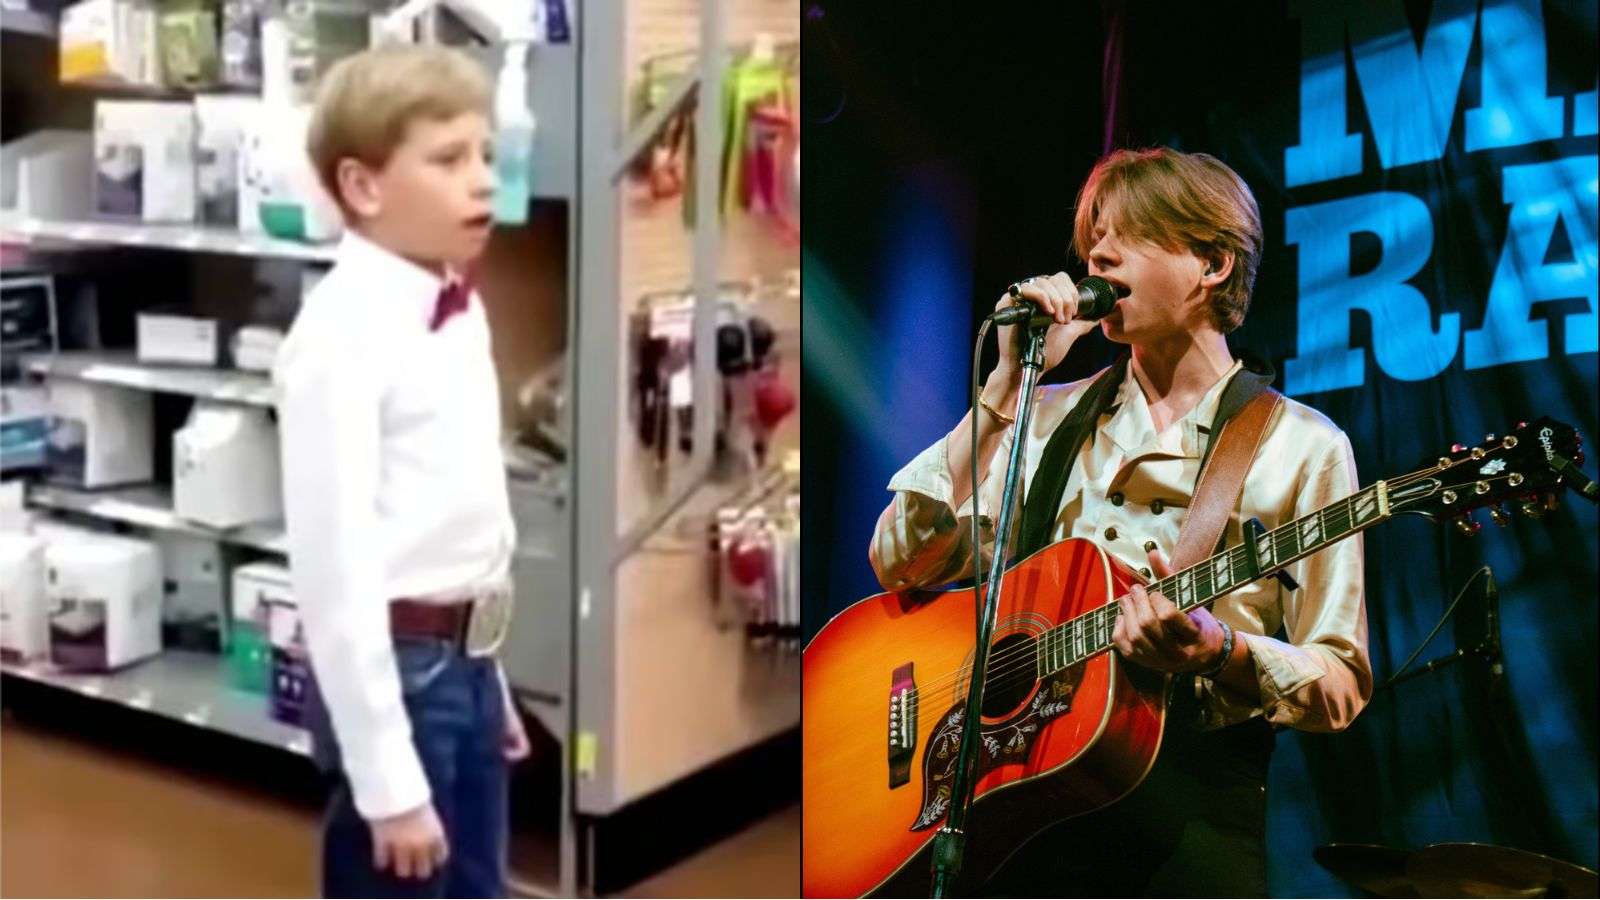 What happend to the Walmart yodeling kid?